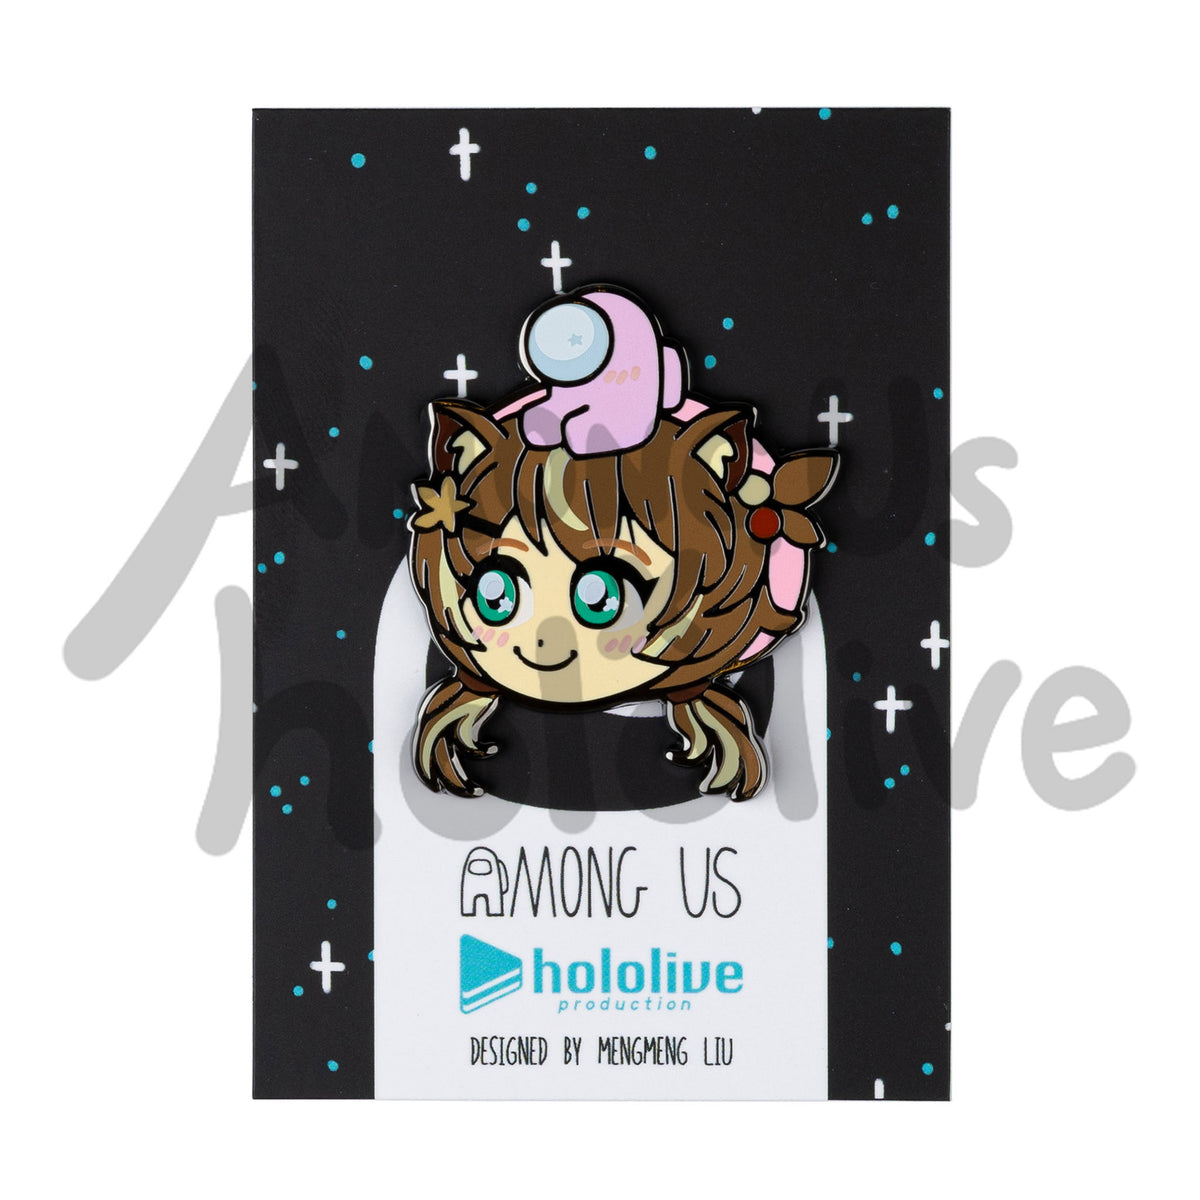 Hololive x Among Us black backing card covered with blue and white stars. There&#39;s a white Crewmate in the middle of the card covered up by an enamel pin of Risu&#39;s face a tiny pink Crewmate sitting atop her head. Backing Card text reads &quot;Among Us Hololive Production Designed by Mengmeng Liu.&quot;